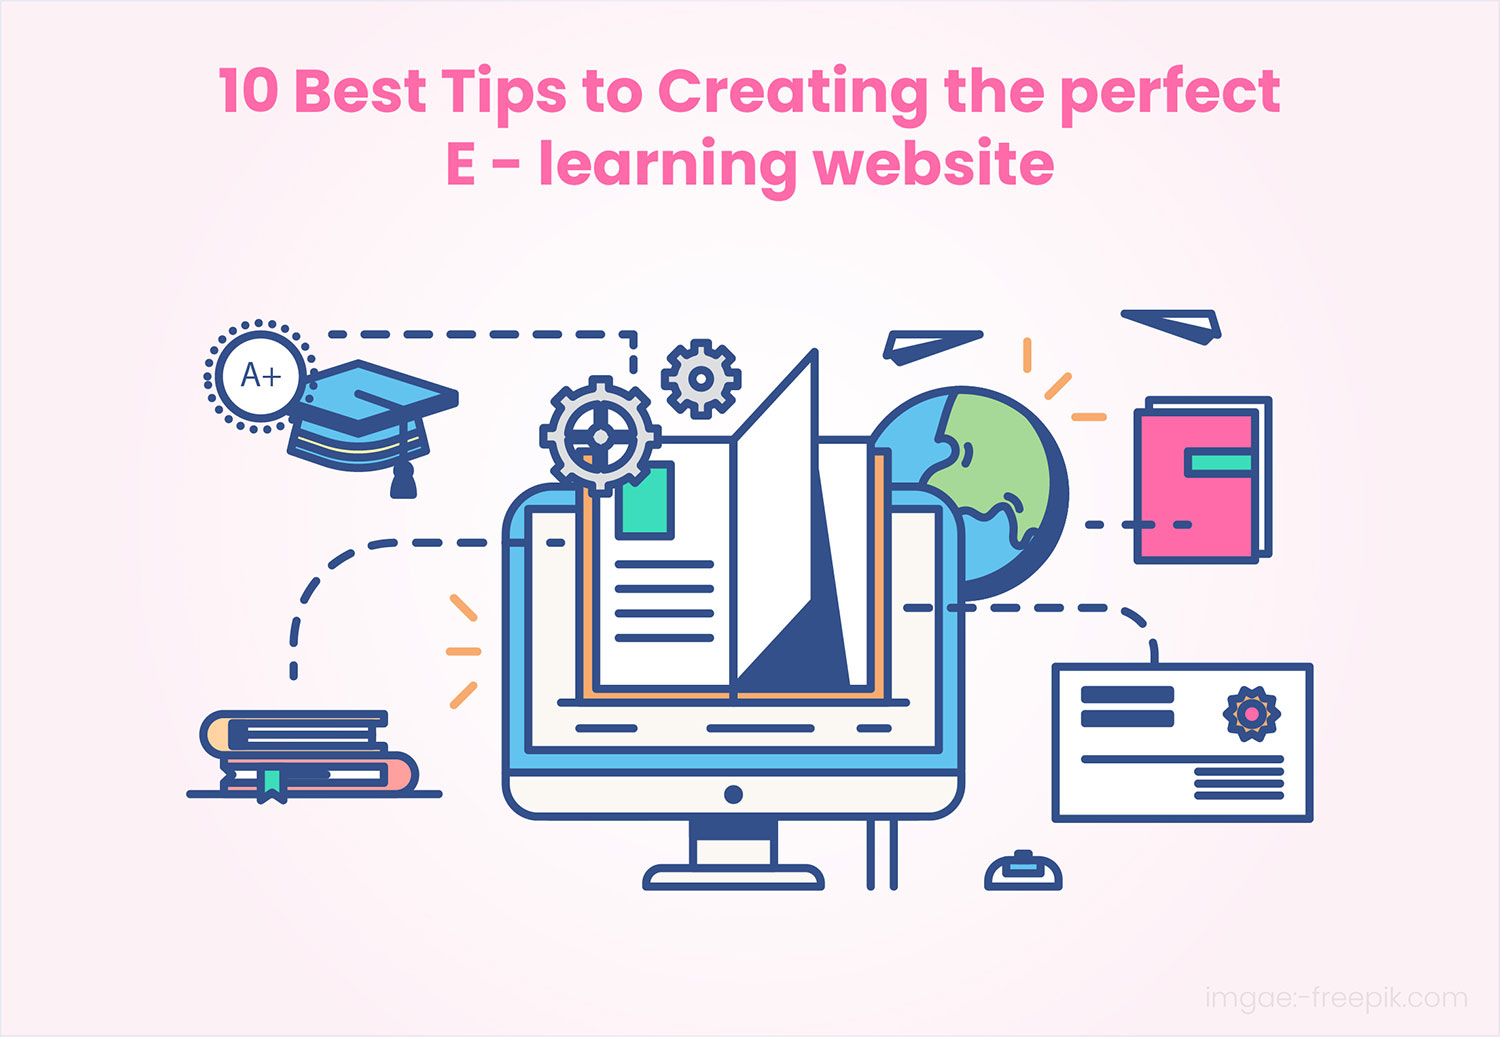 10 Best Tips for Creating the Perfect E-Learning Website.